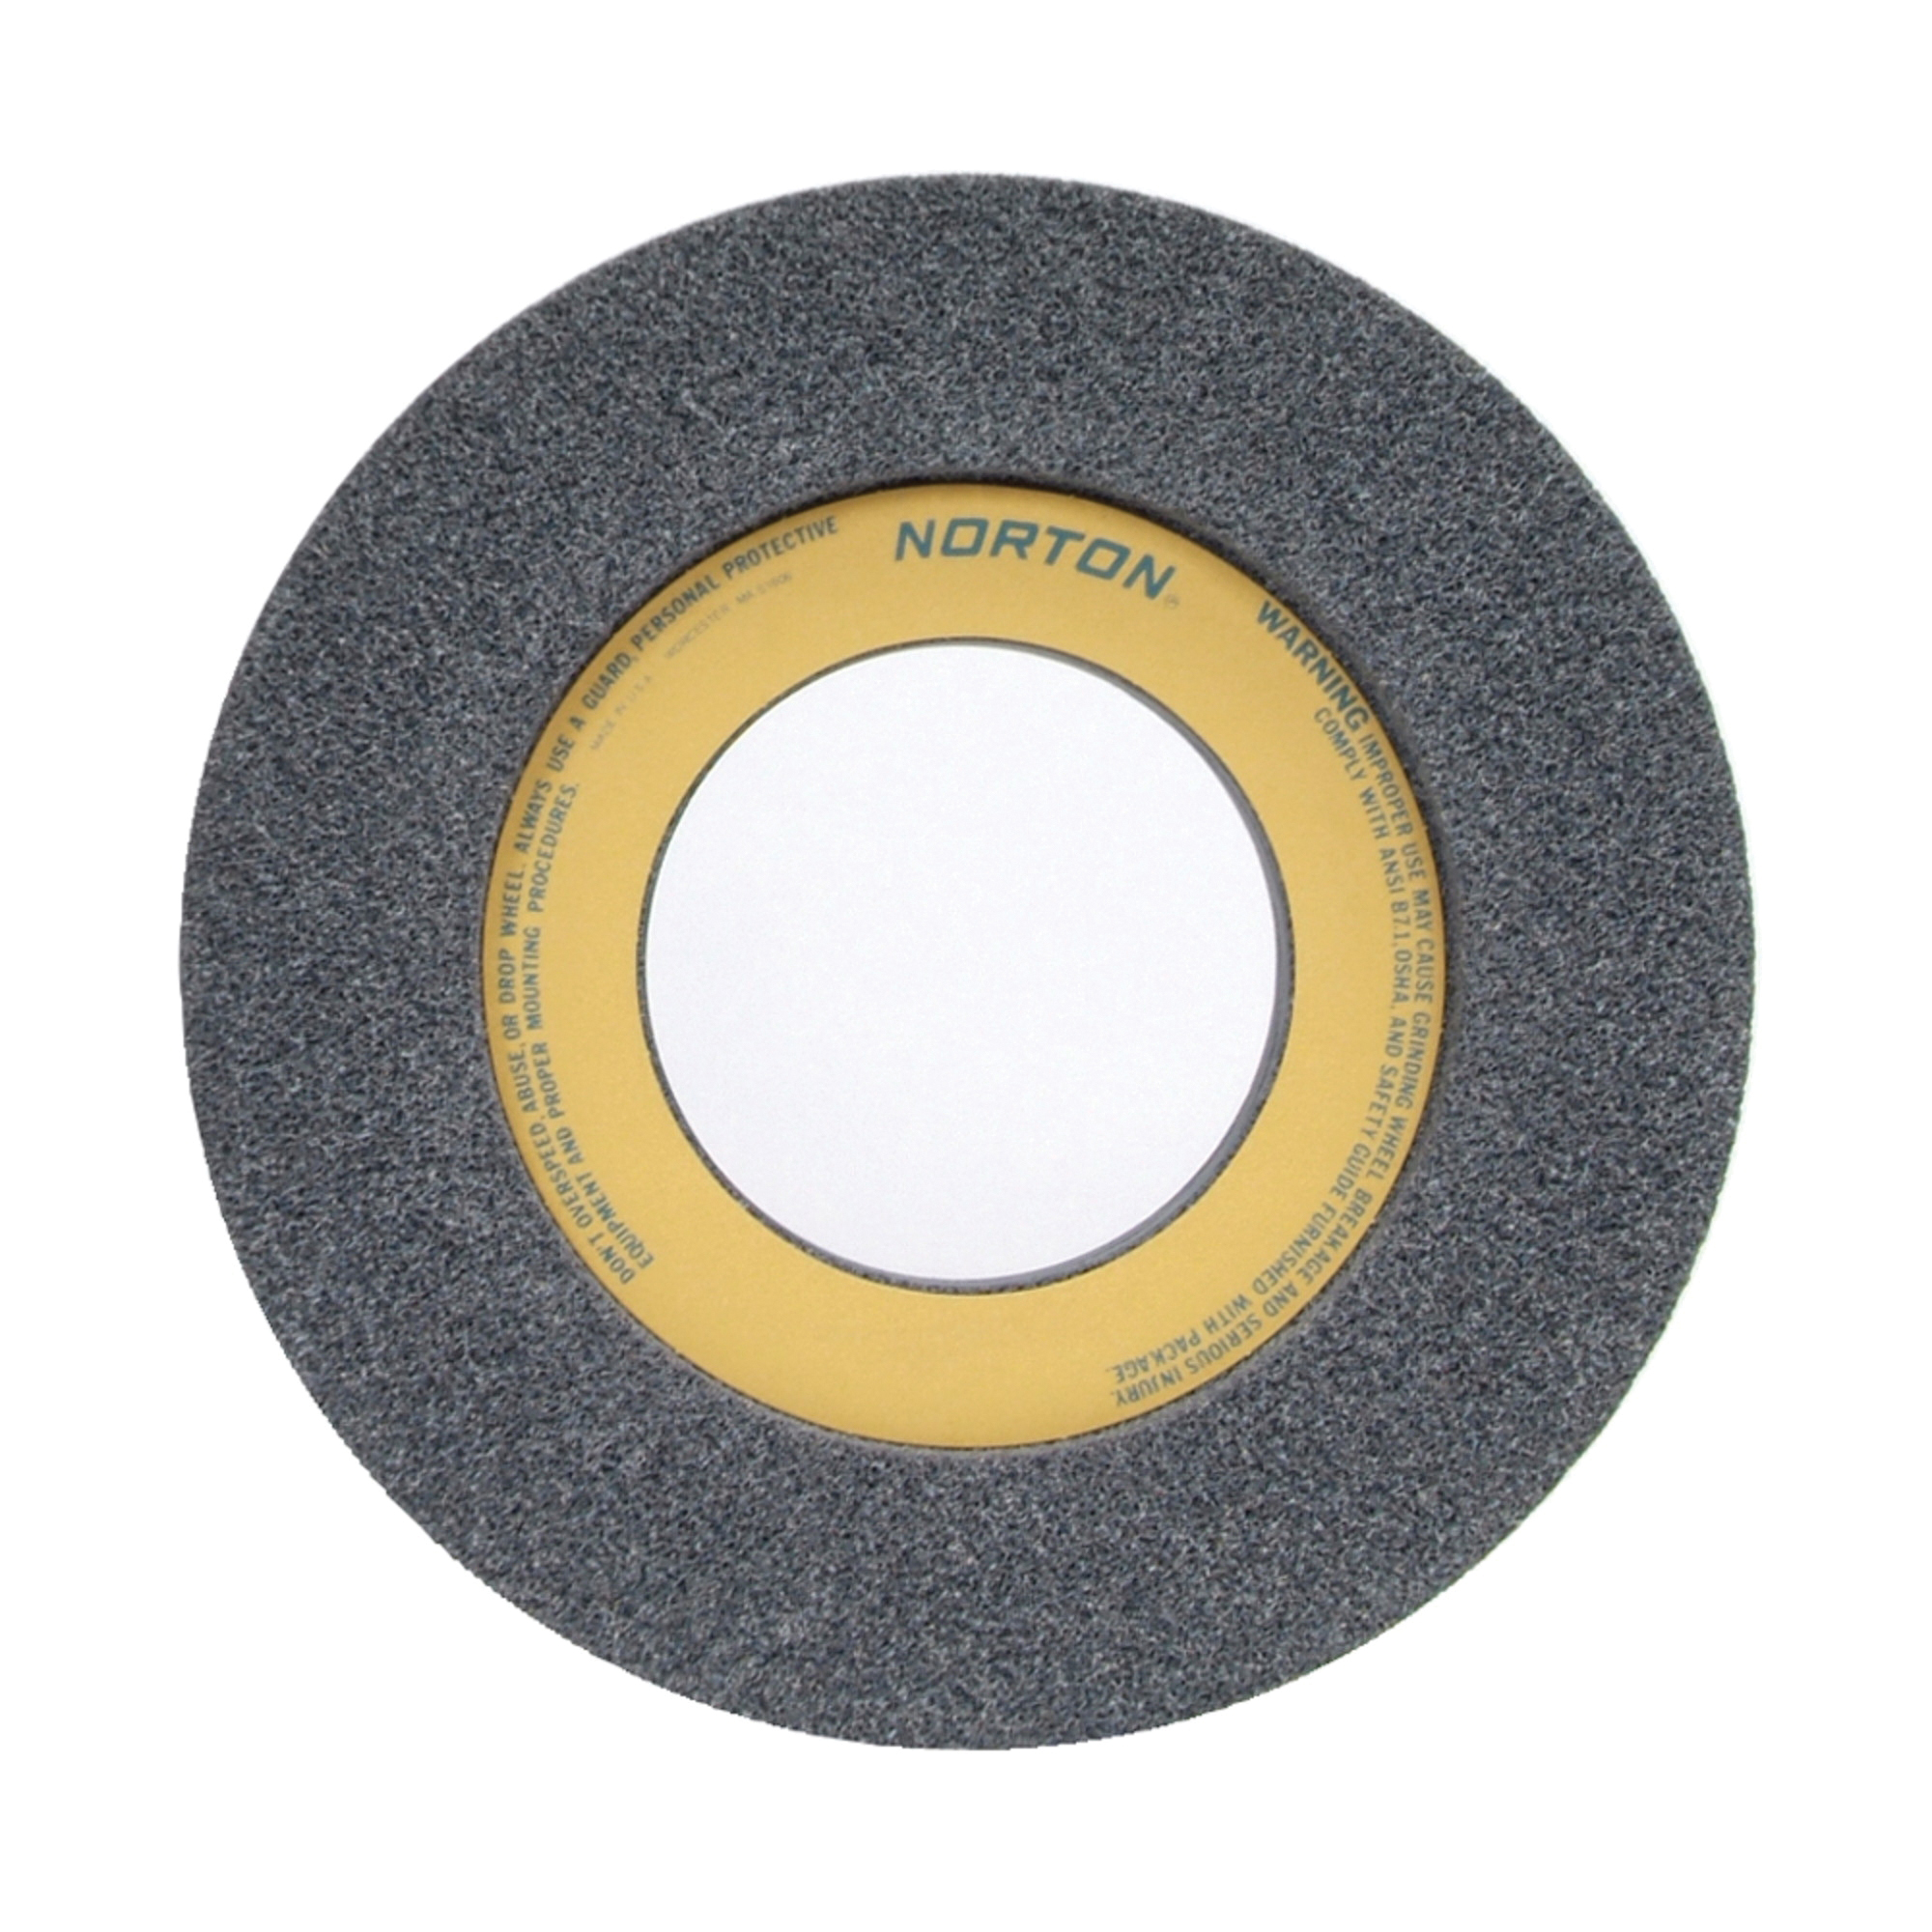 Norton® 66253263180 32A 1-Side Recessed Toolroom Wheel, 12 in Dia x 1-1/2 in THK, 5 in Center Hole, 46 Grit, Aluminum Oxide Abrasive